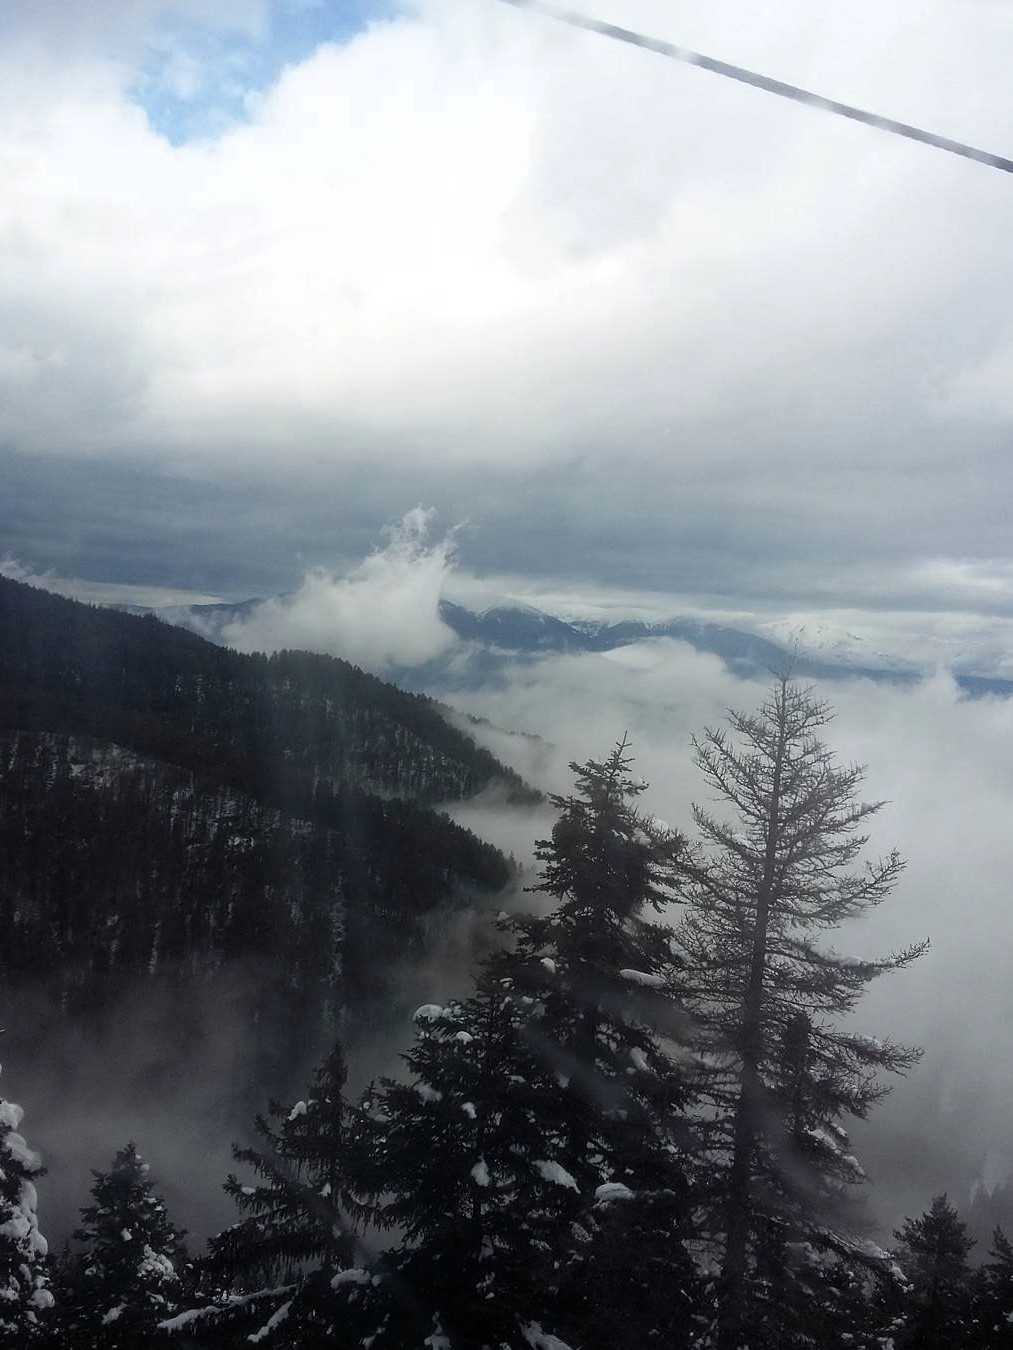 An eerie mist rises from the mountains in Bansko, Bulgaria